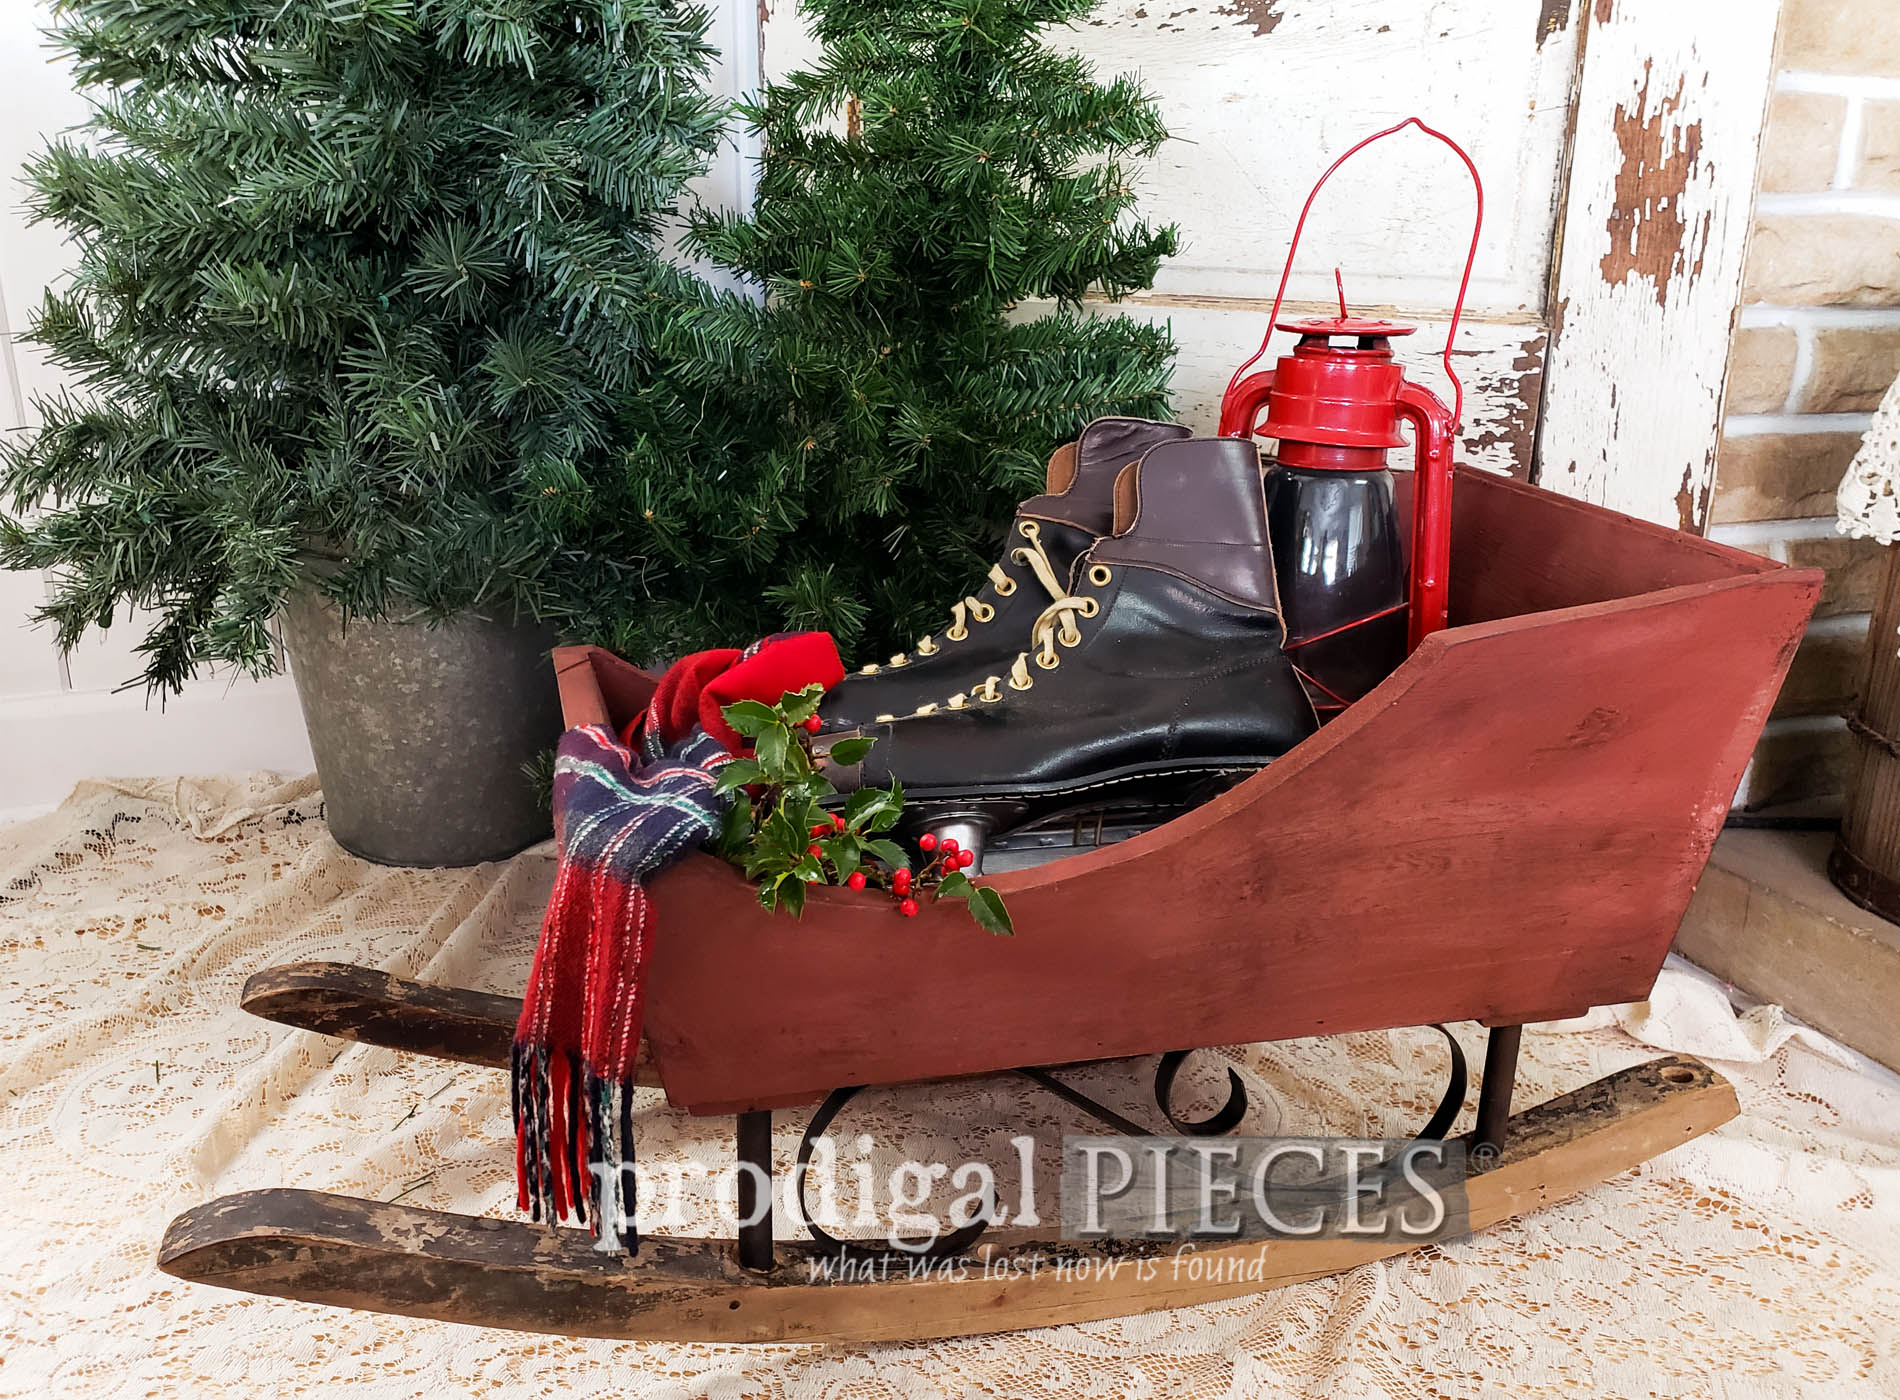 Featured Upcycled Christmas Sleigh made from Curbside Finds by Larissa of Prodigal Pieces | prodigalpieces.com #prodigalpieces #diy #christmas #home #homedecor #farmhouse #handmade